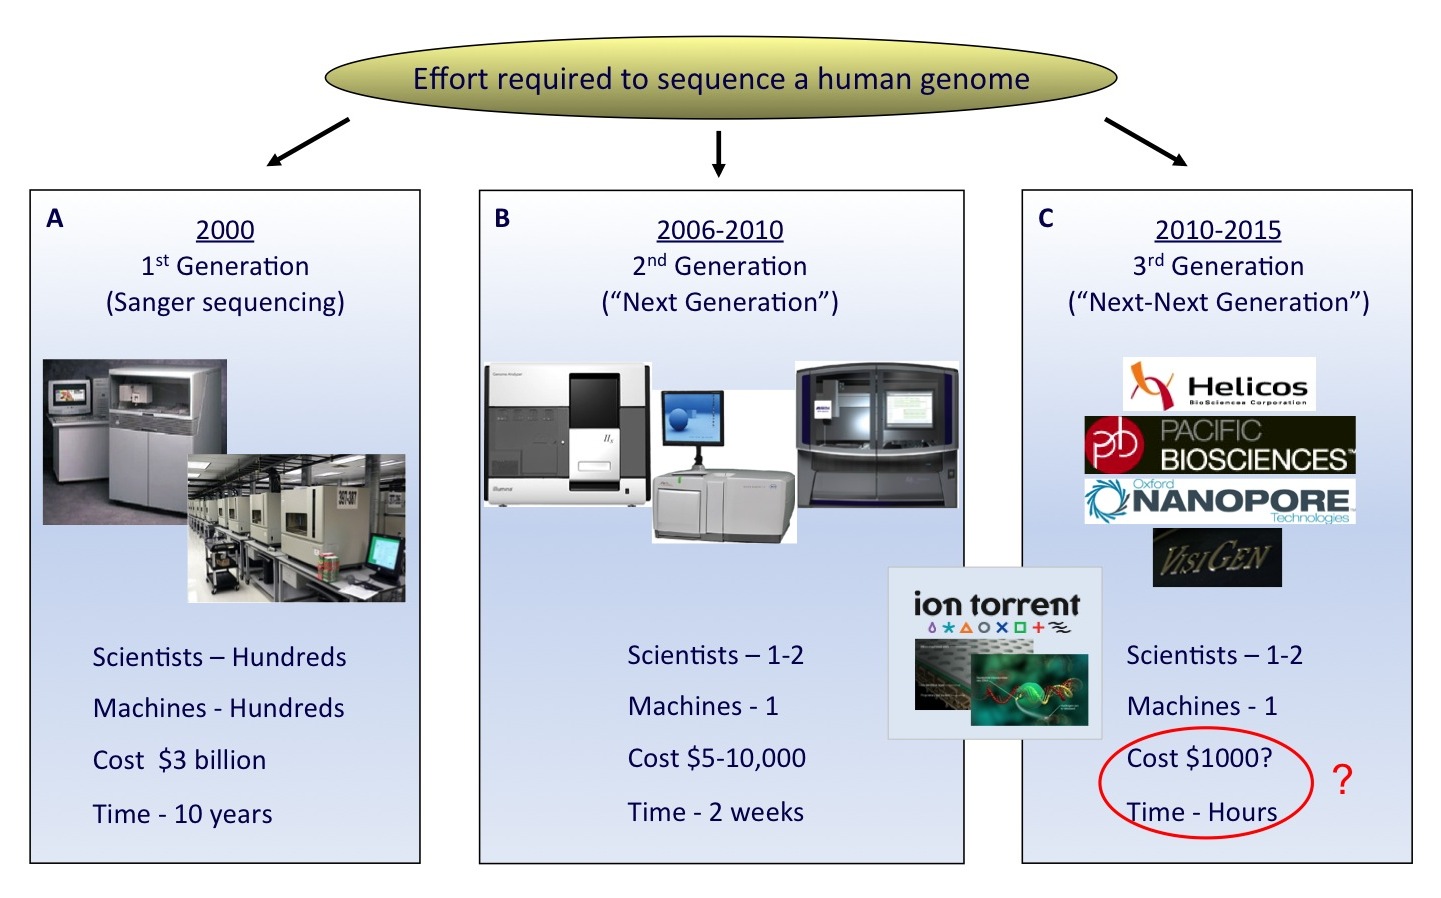 FIGURE 1 The rapid evolution of sequencing technologies. A. First generation Sanger sequencing technology. B. Second ‘Next’ generation massively parallel sequencing technology (454 Sequencing © Roche Diagnostics) C. Third ‘Next-Next’ generation single molecule, real-time sequencing technology. In the coming years, second or third generation technologies may develop to an extent where a human genome can be sequenced for a USD 1,000 in a matter of hours